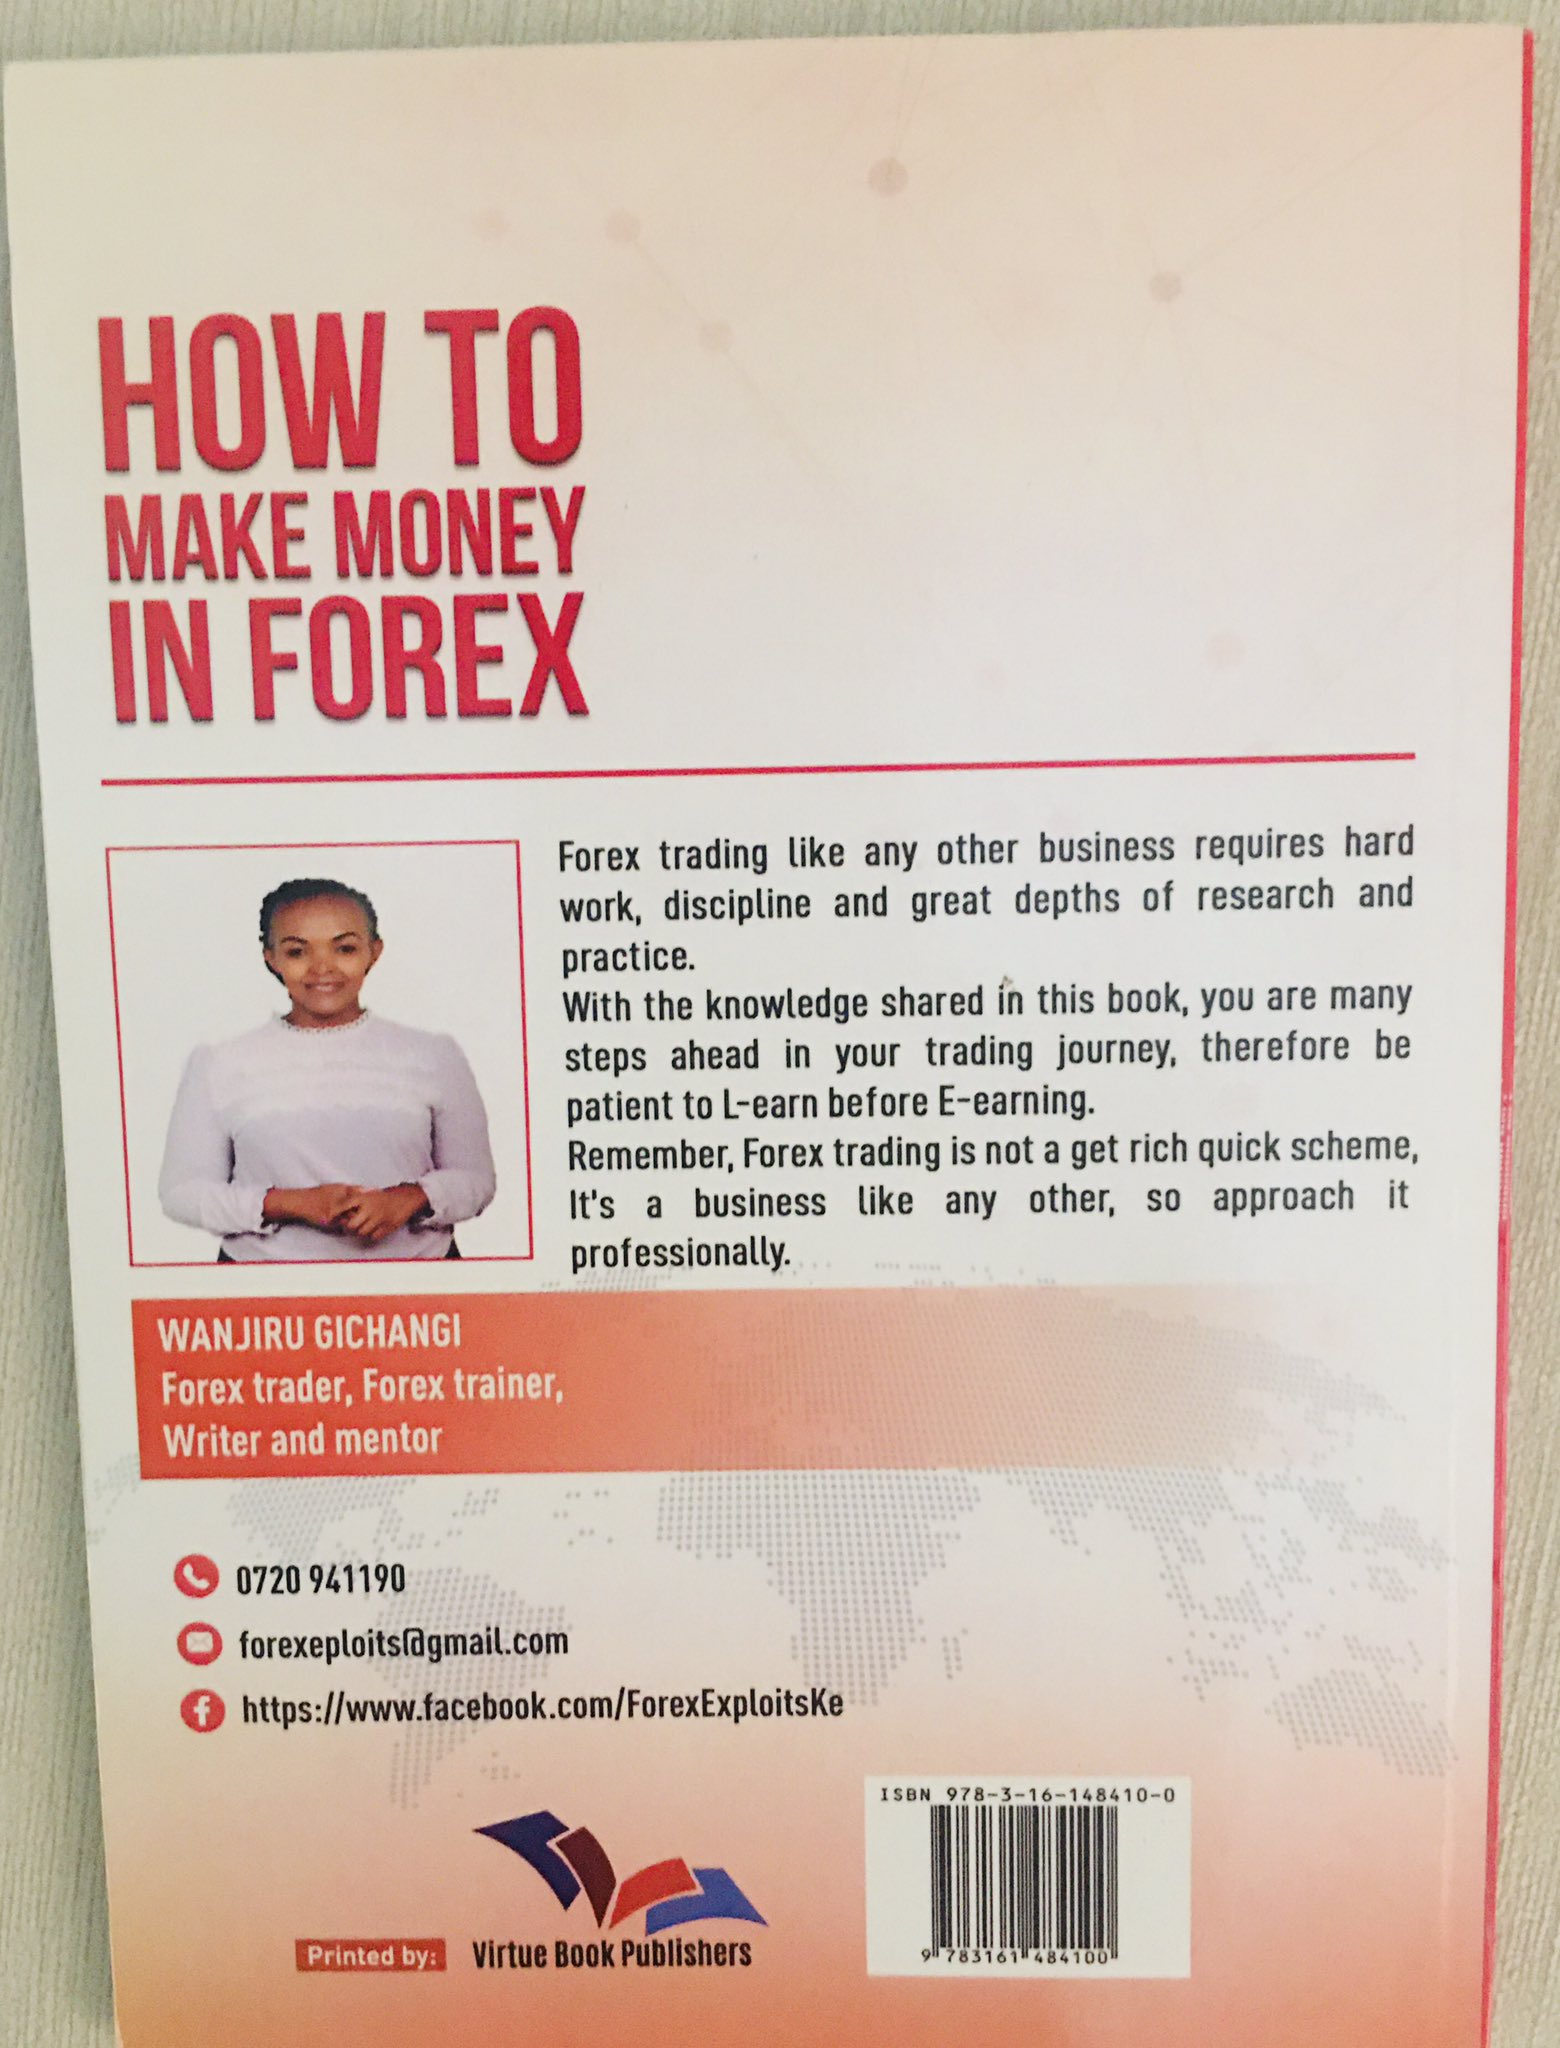 tæt Forsømme hjørne تويتر \ Wanjiru Gichangi على تويتر: "If you are a beginner in FOREX TRADING  and still don't know HOW or WHERE to start, get a copy of my ebook and  learn how